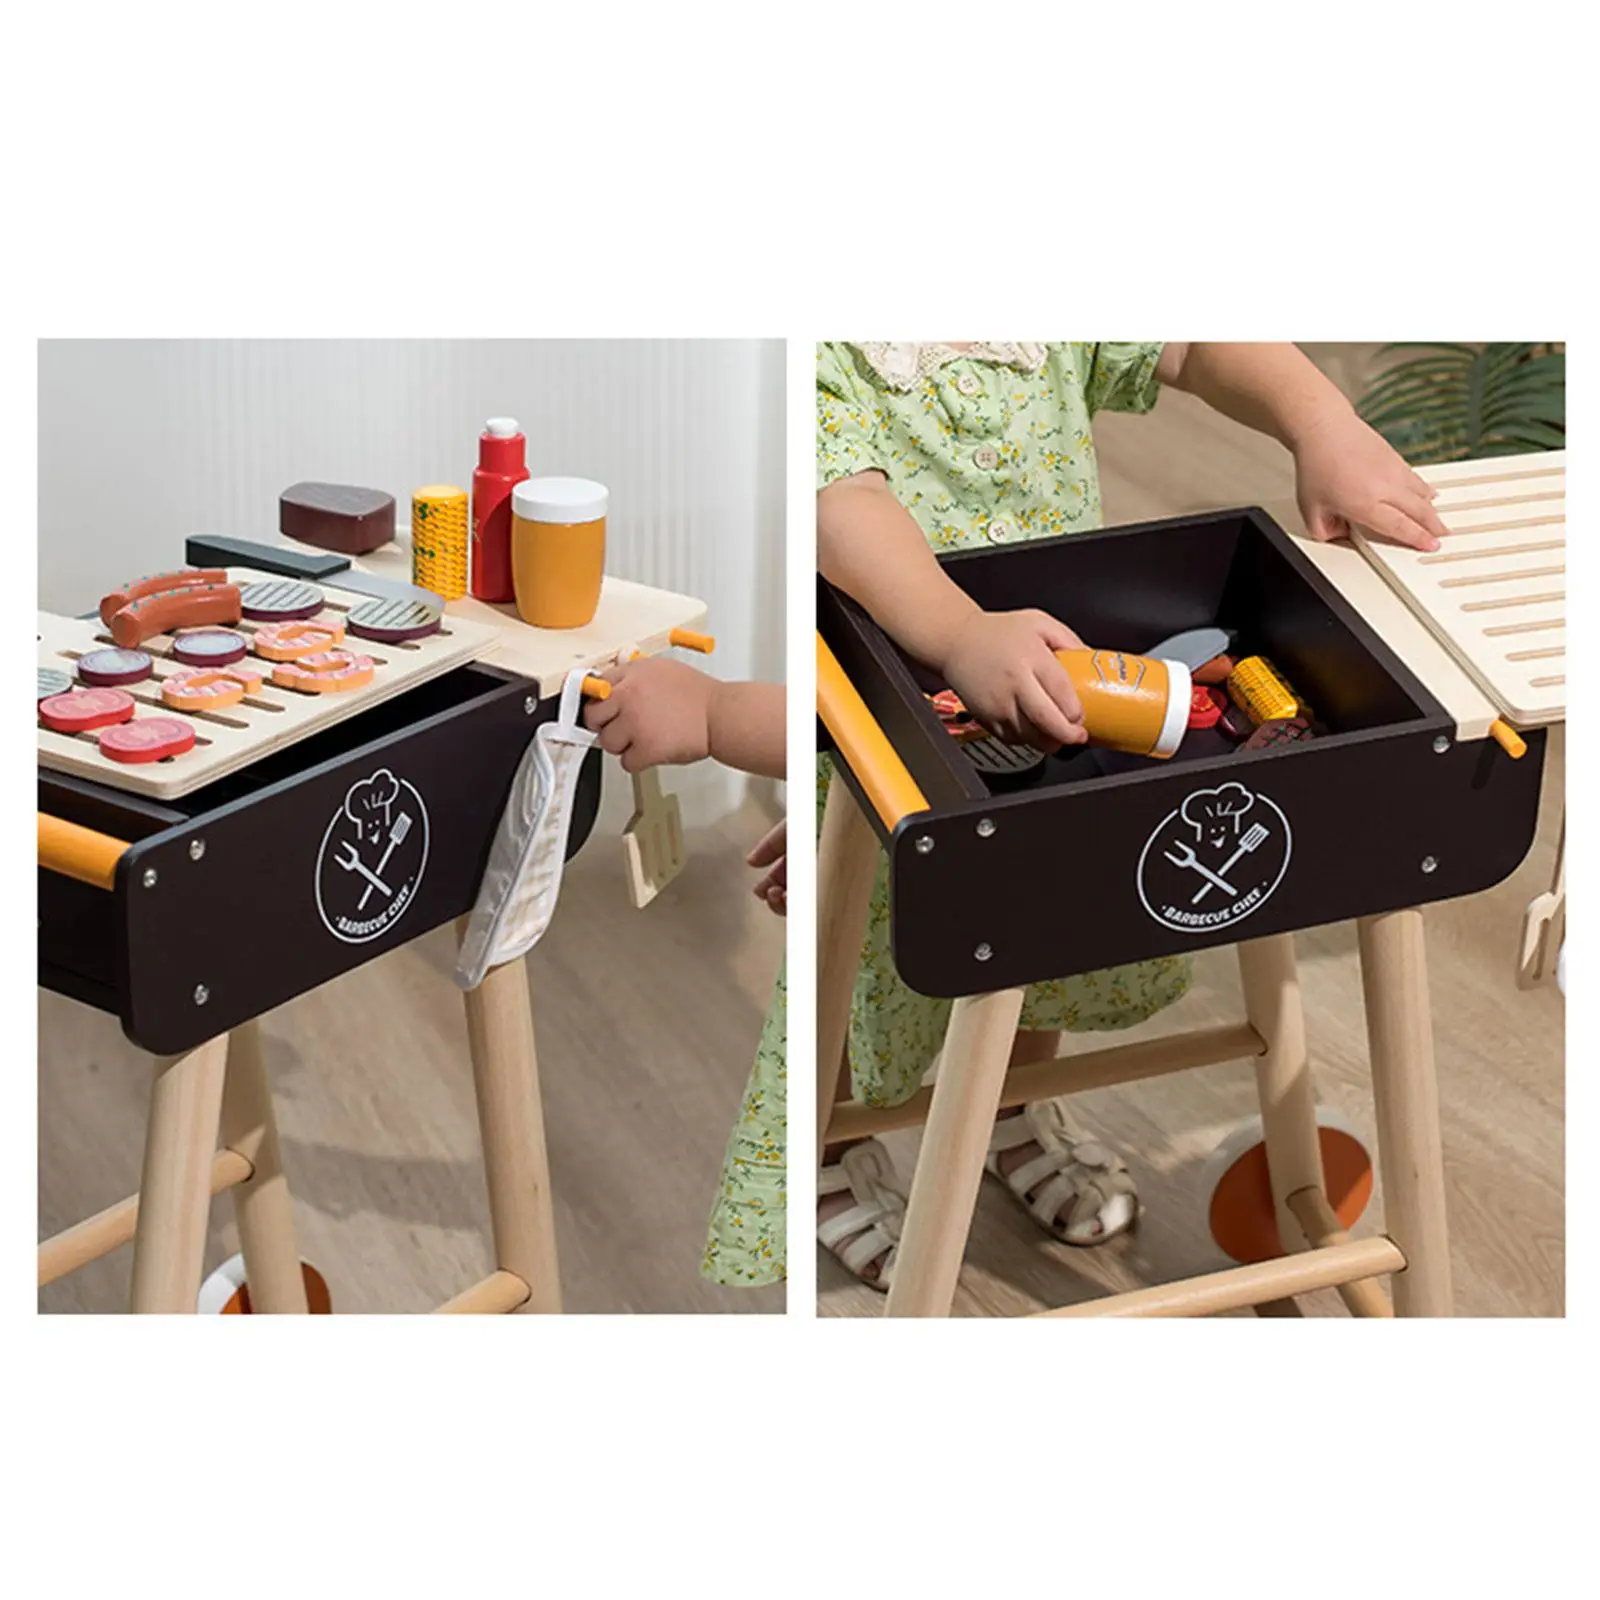 Realistic Wooden Toy BBQ Set Barbeque Toy Cooking Playset for Children